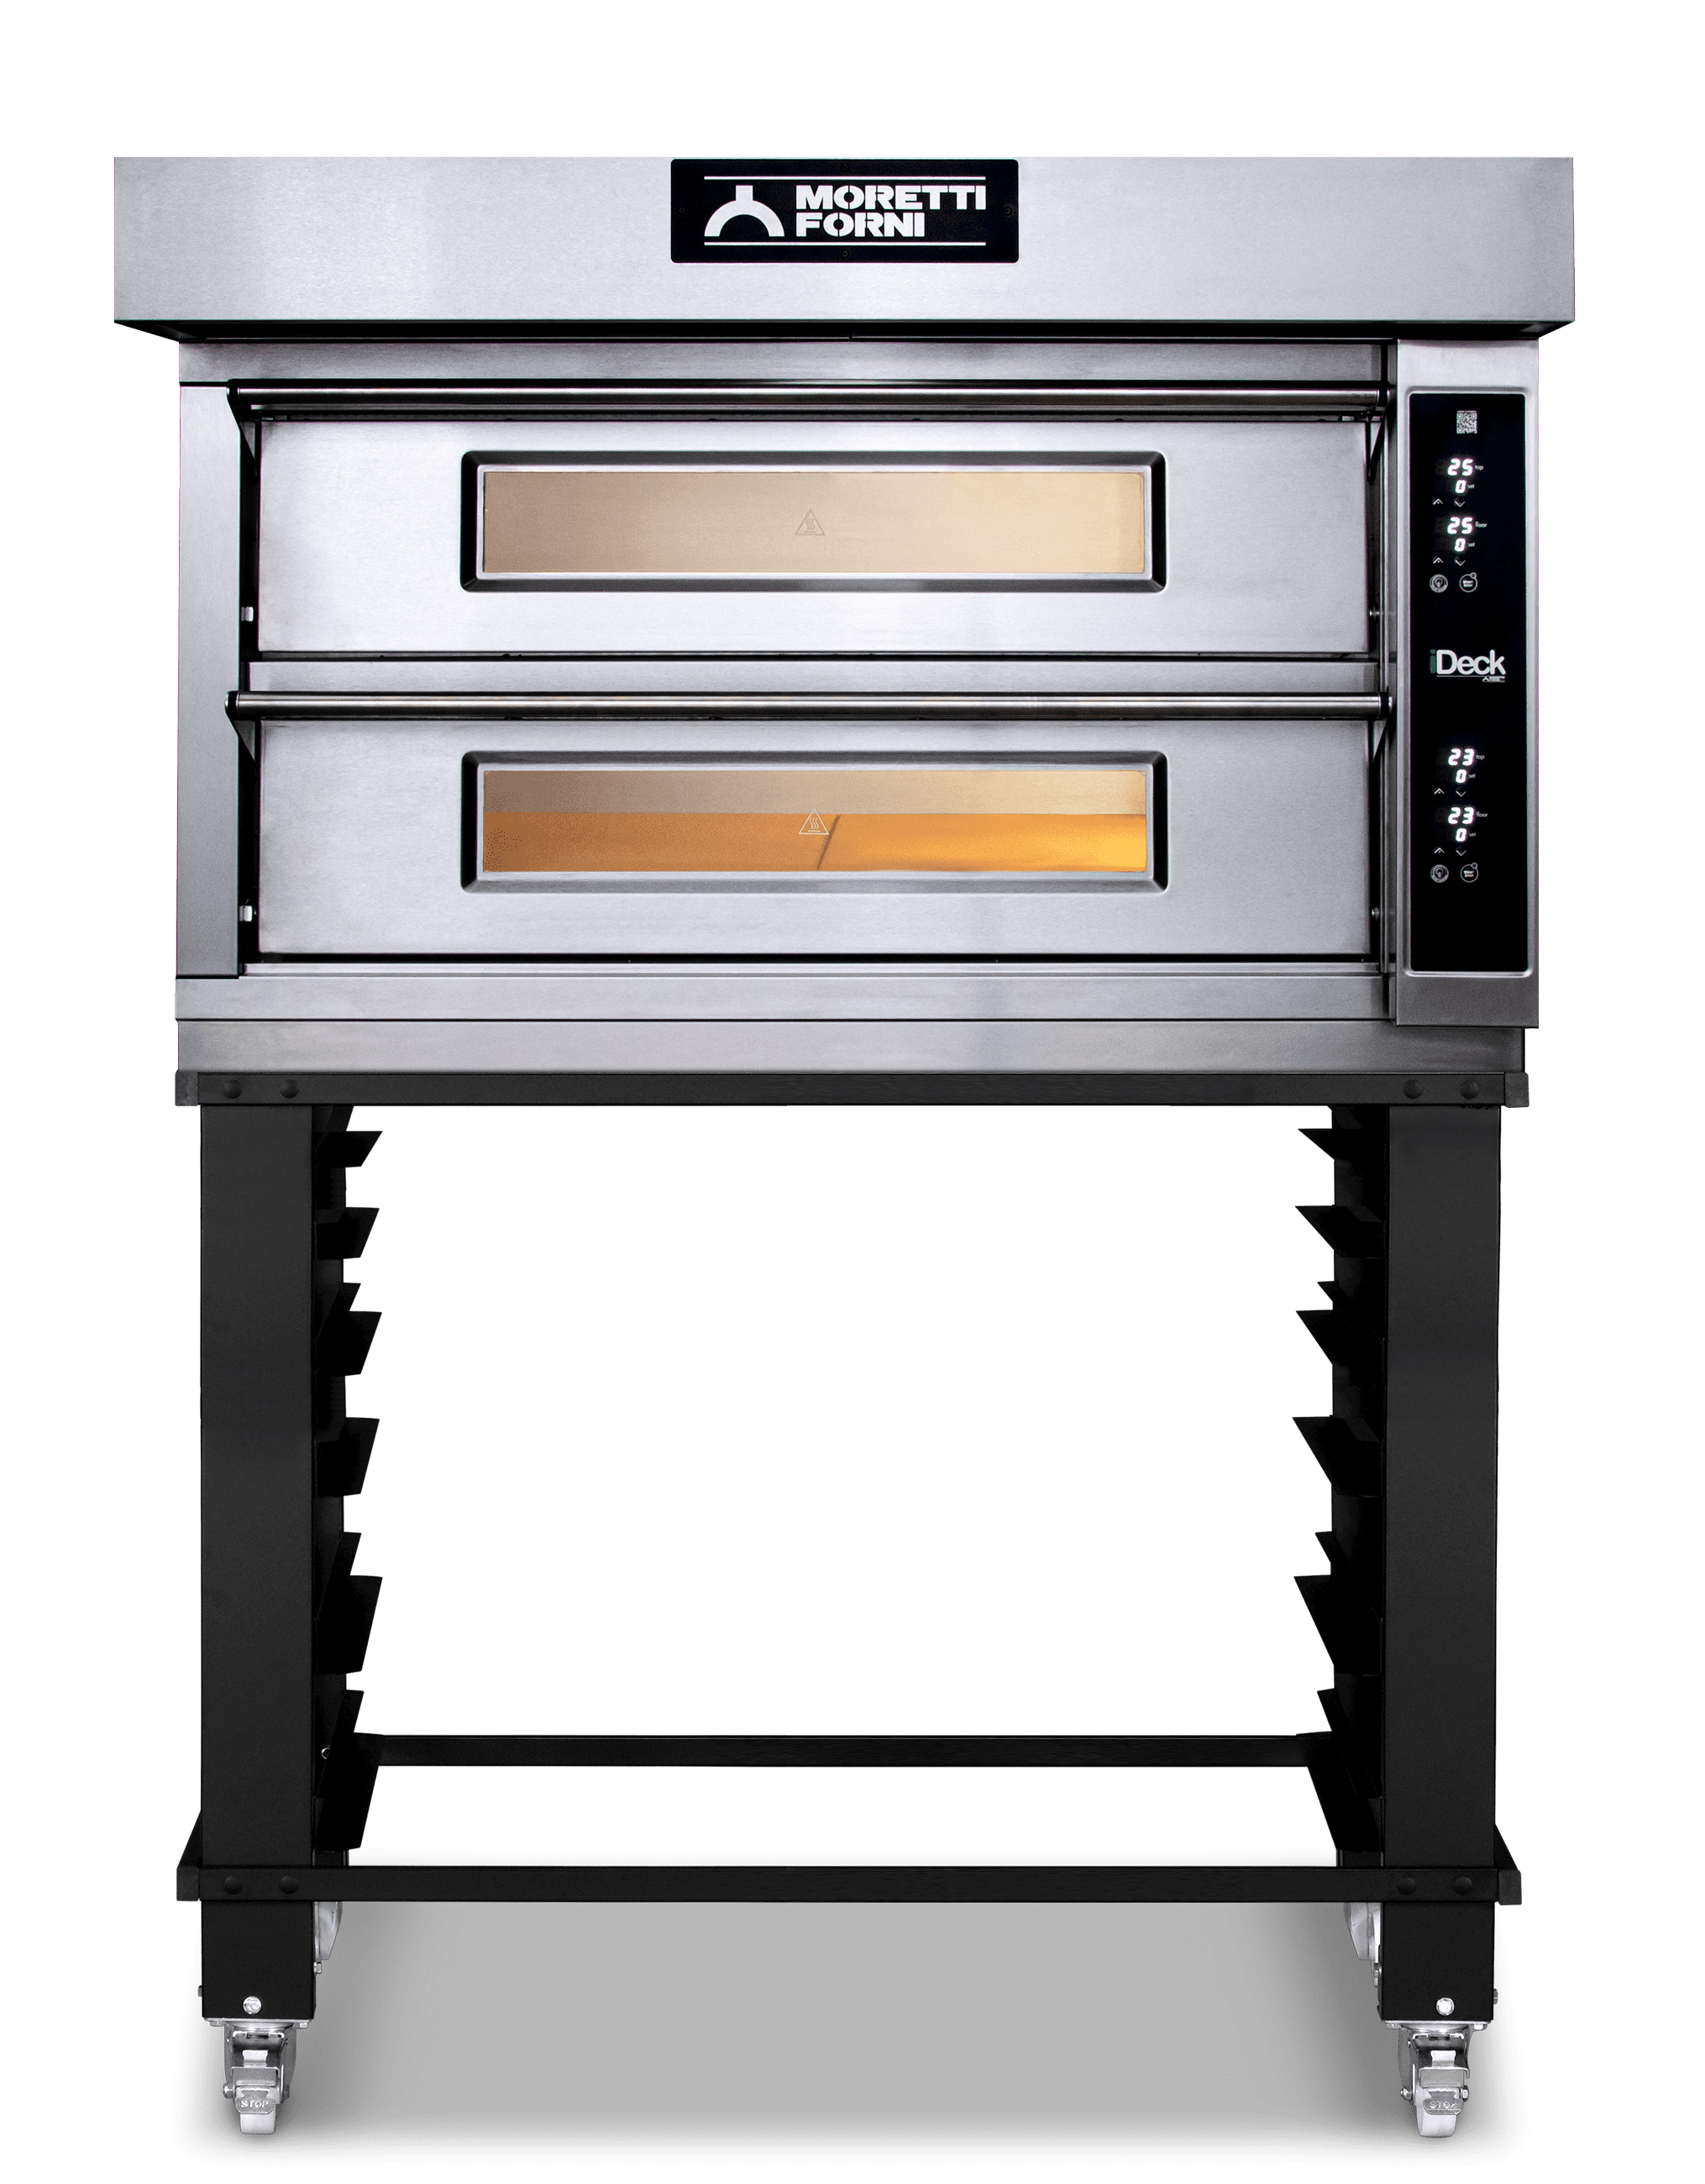 ID-D 105.65 iDeck electronic Control Electric Pizza Oven 105 x 65 cm chamber. 2 Deck